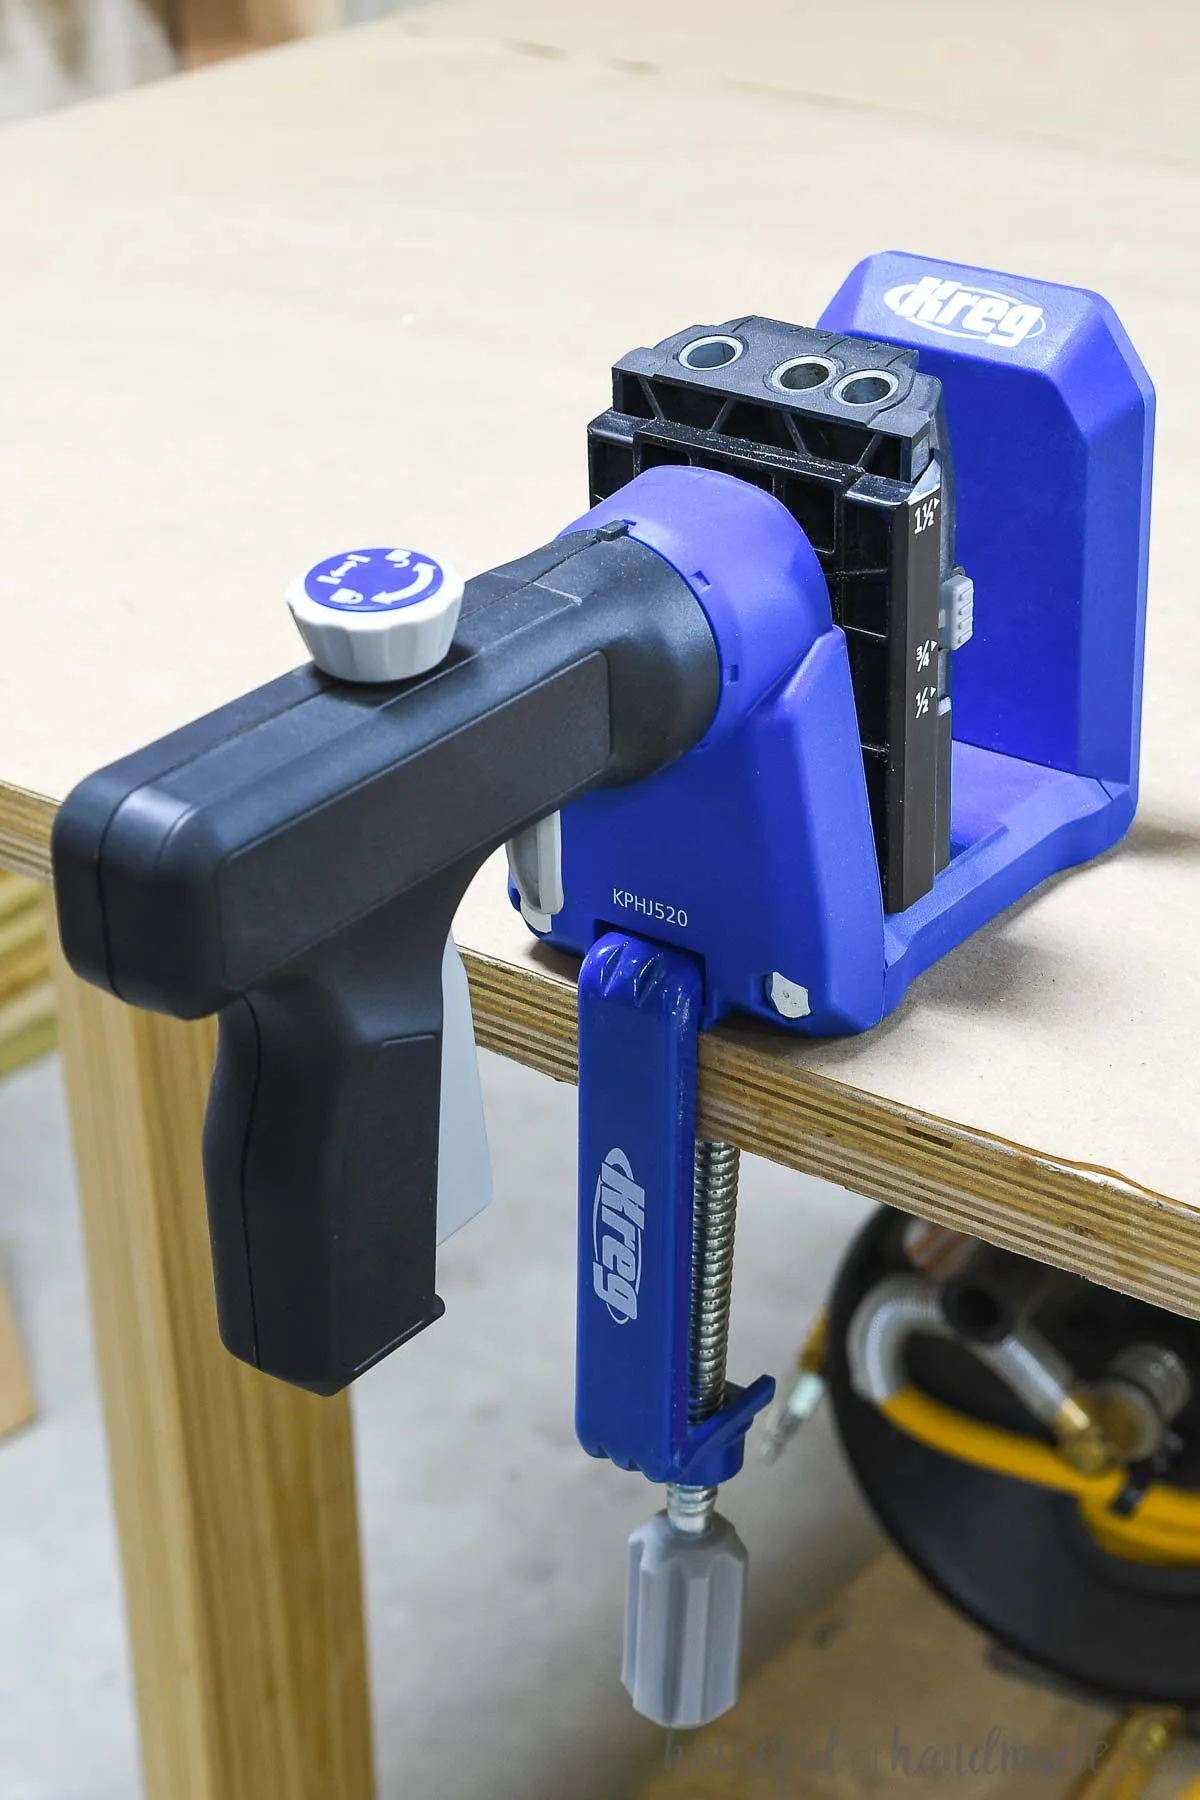 Kreg 520Pro pocket hole jig clamped to a benchtop. 